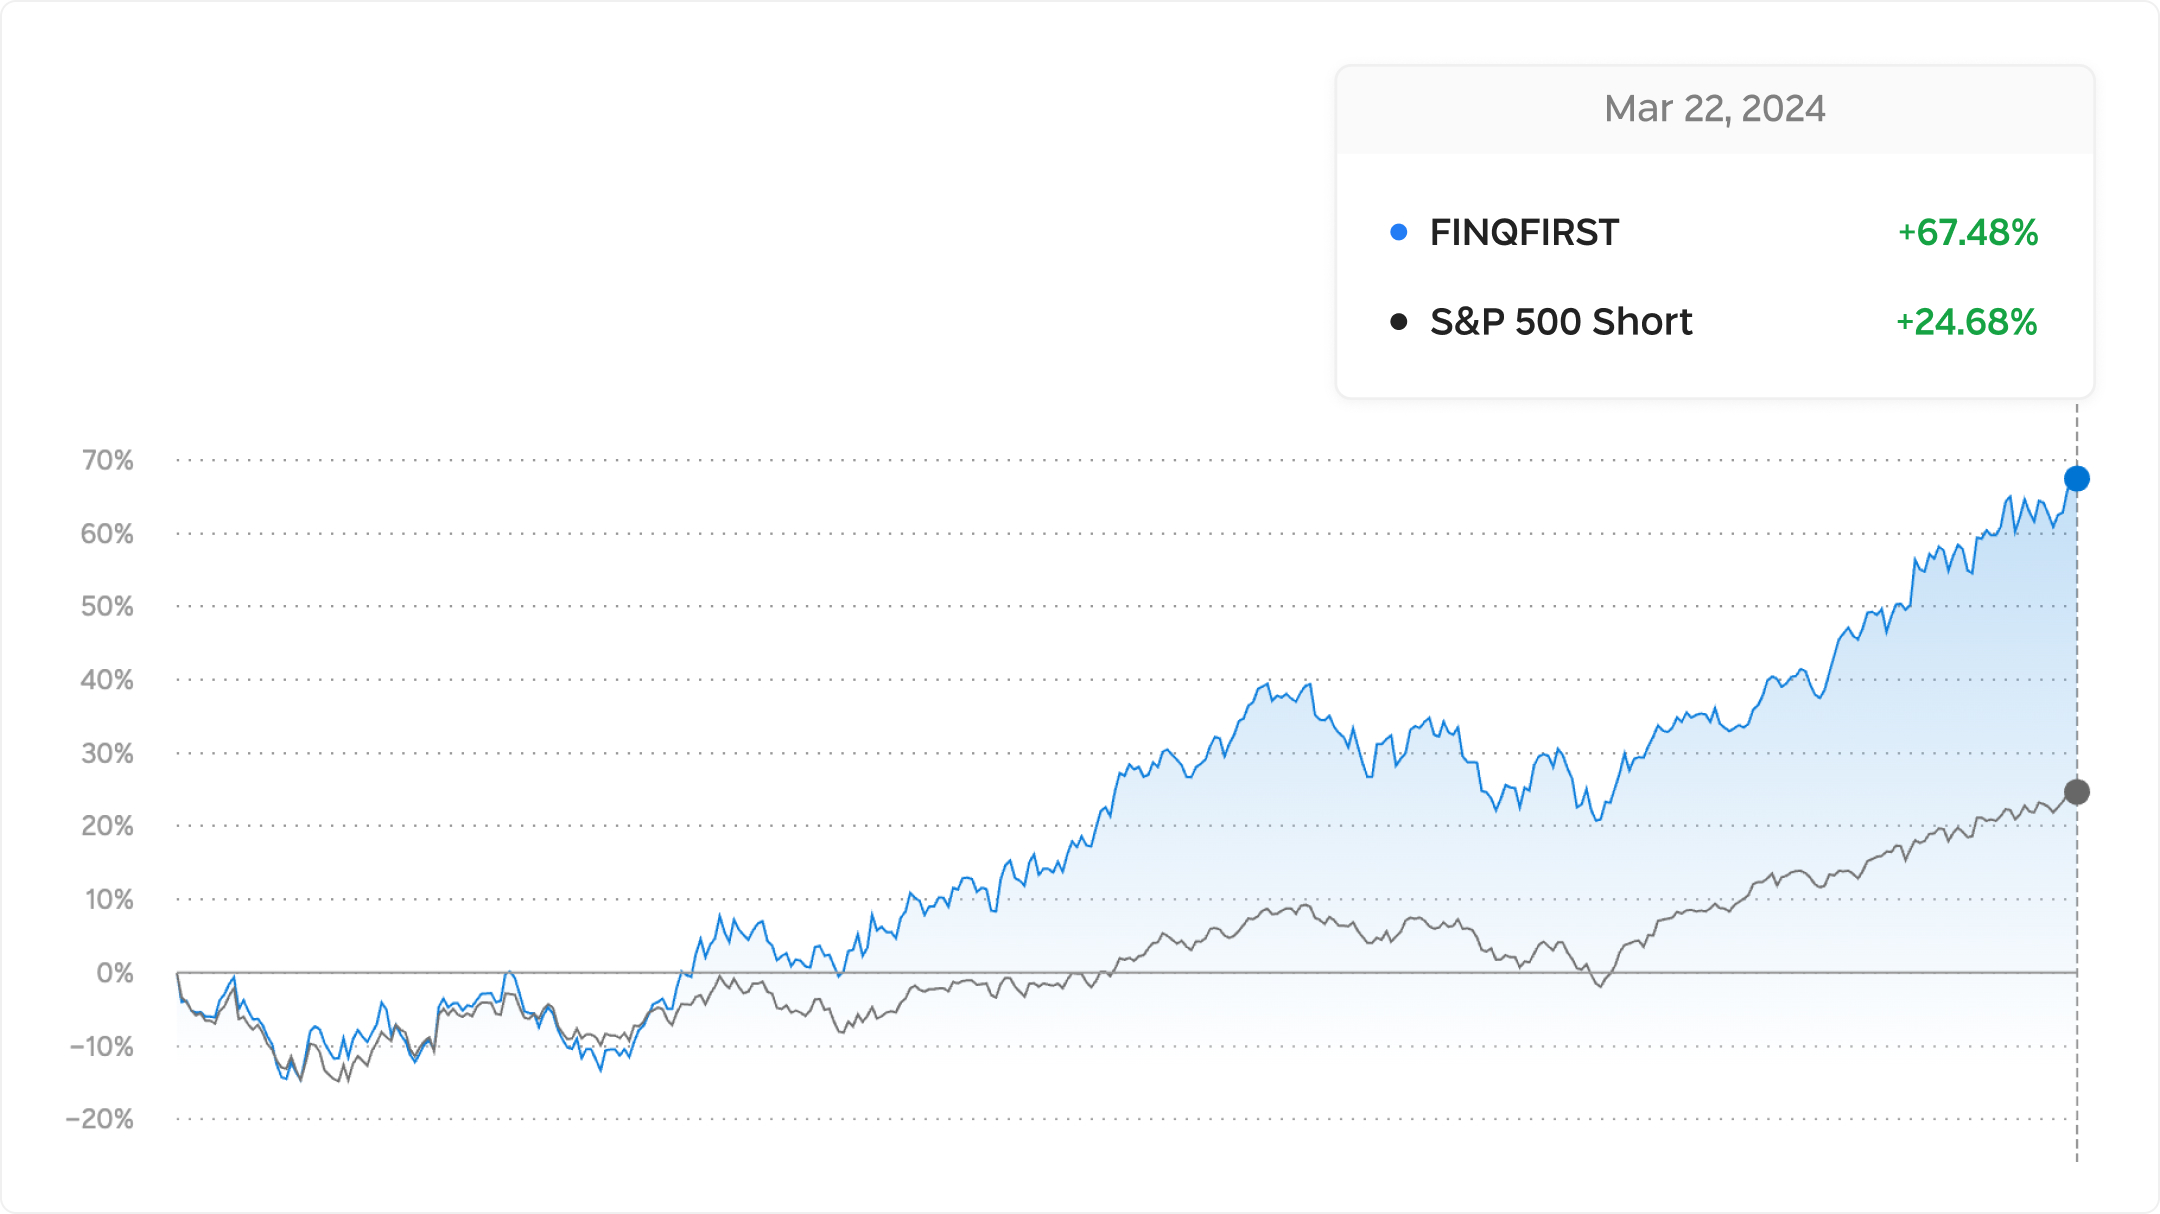 FINQFIRST returns since inception as of end of Q1 2024